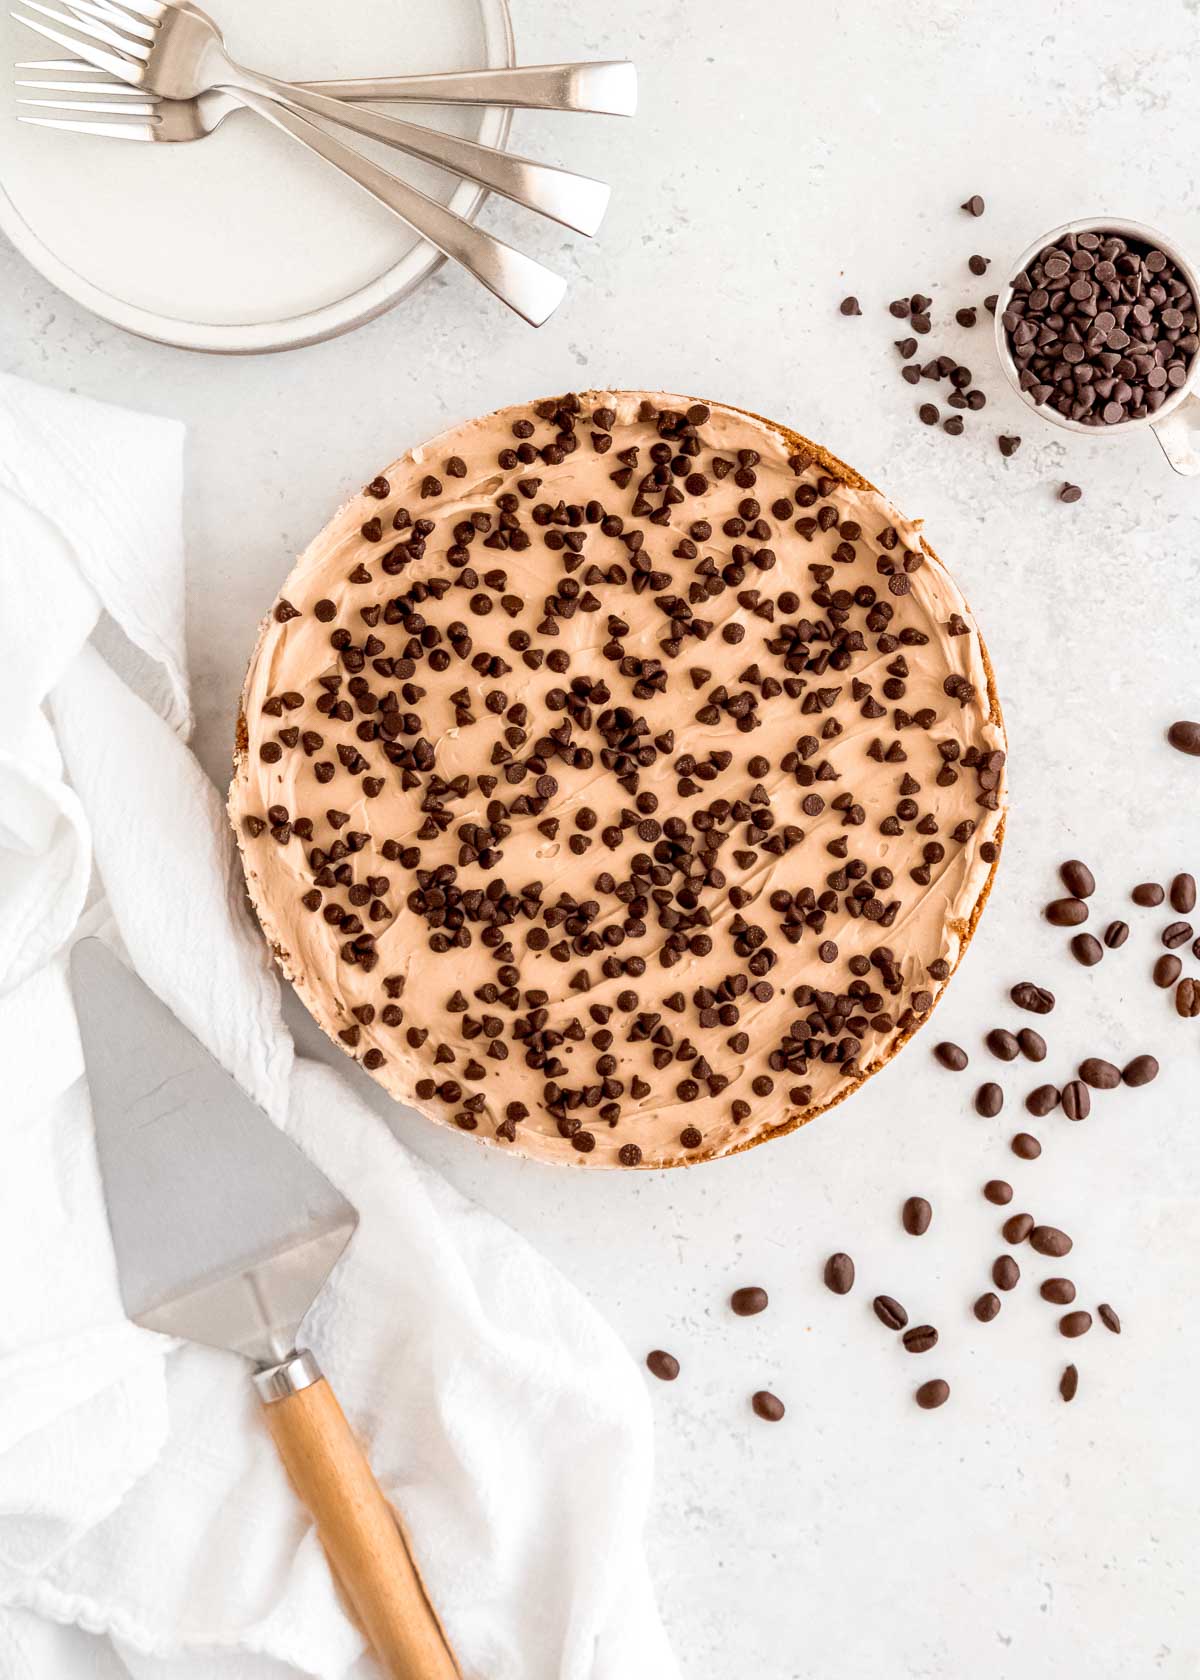 Enjoy unbelievable espresso flavor in this delicious No Bake Mocha Cheesecake! Rich, creamy, and perfect for holidays and celebrations.